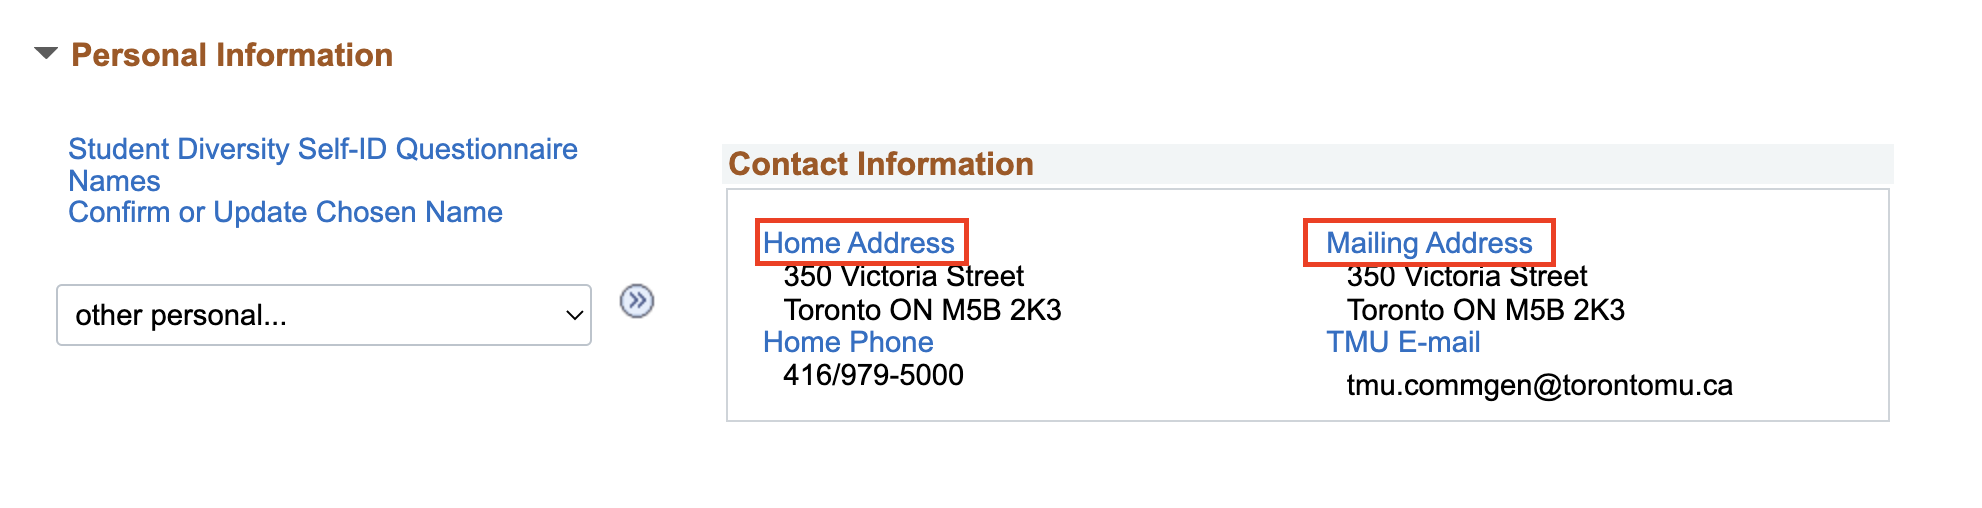 Highlighted Home Address and Mailing Address links on Personal Information section of MyServiceHub.